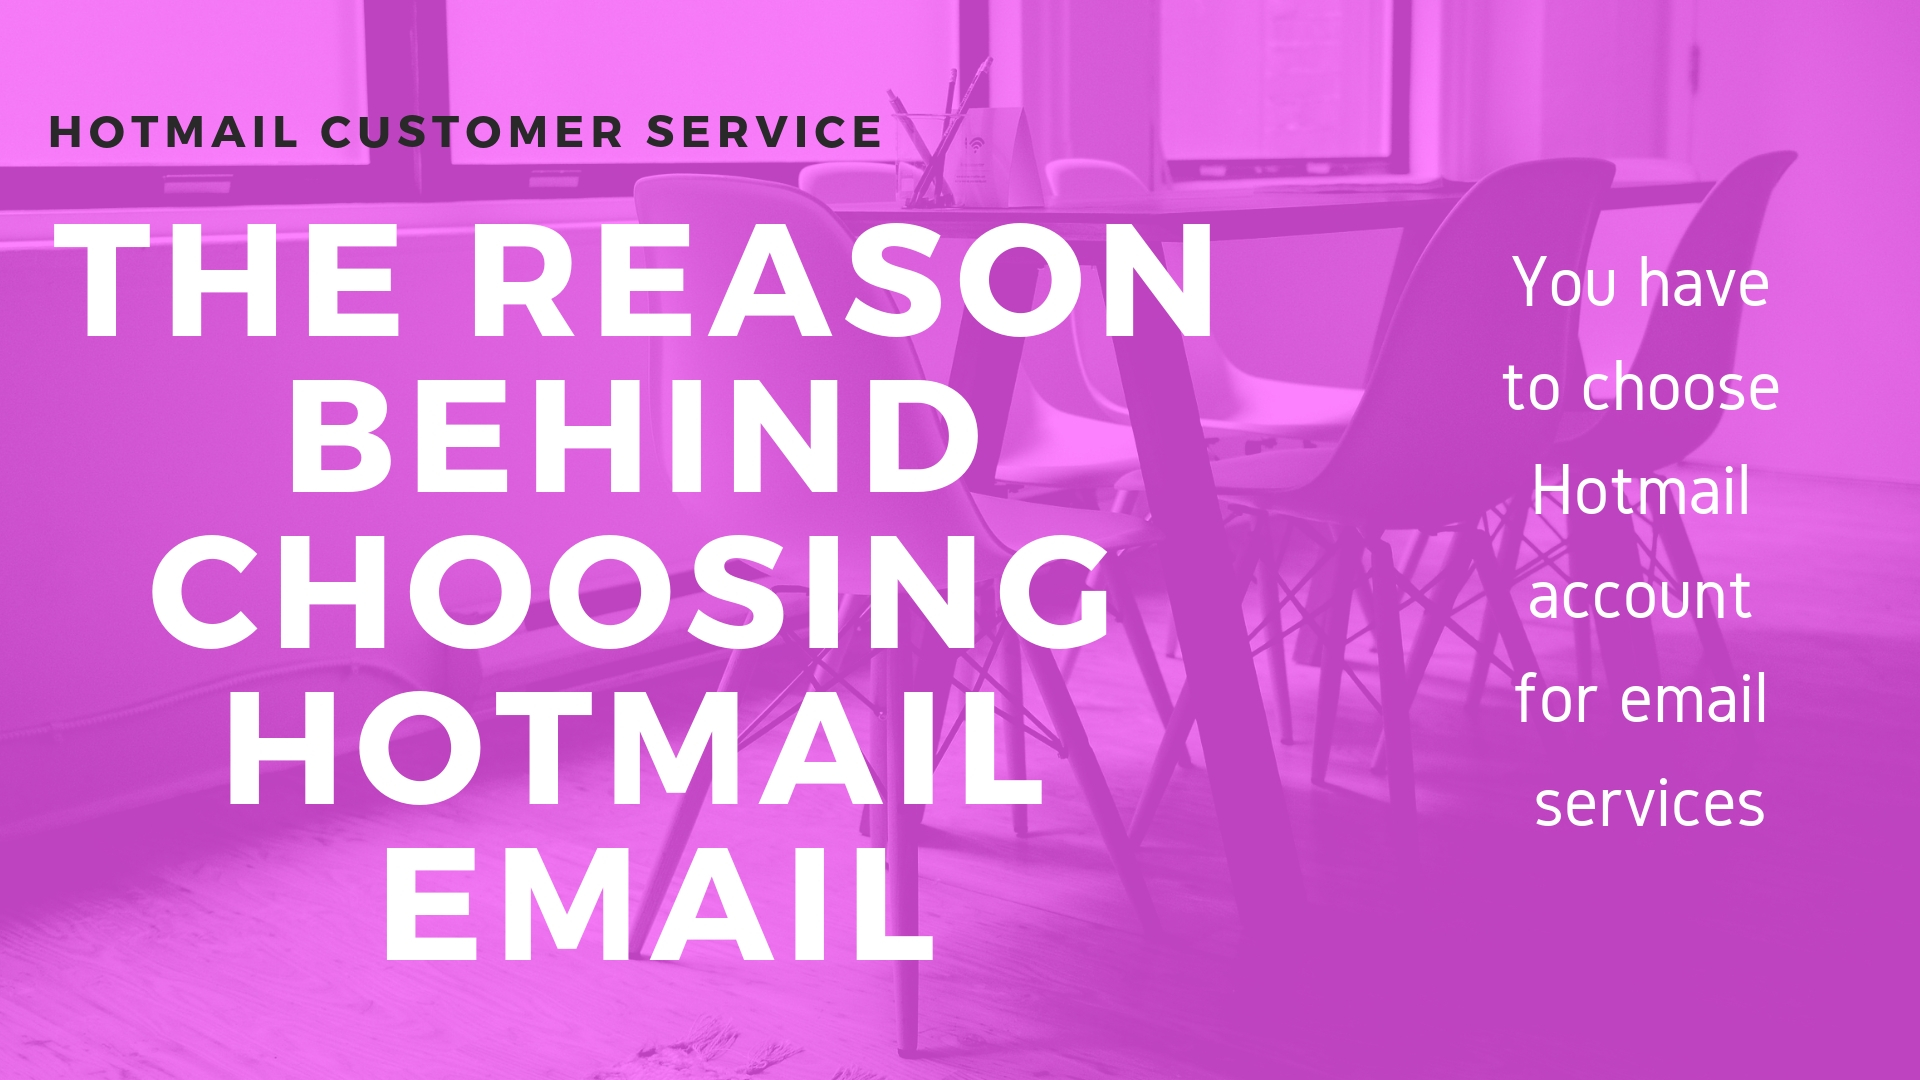 The Reason behind choosing Hotmail email